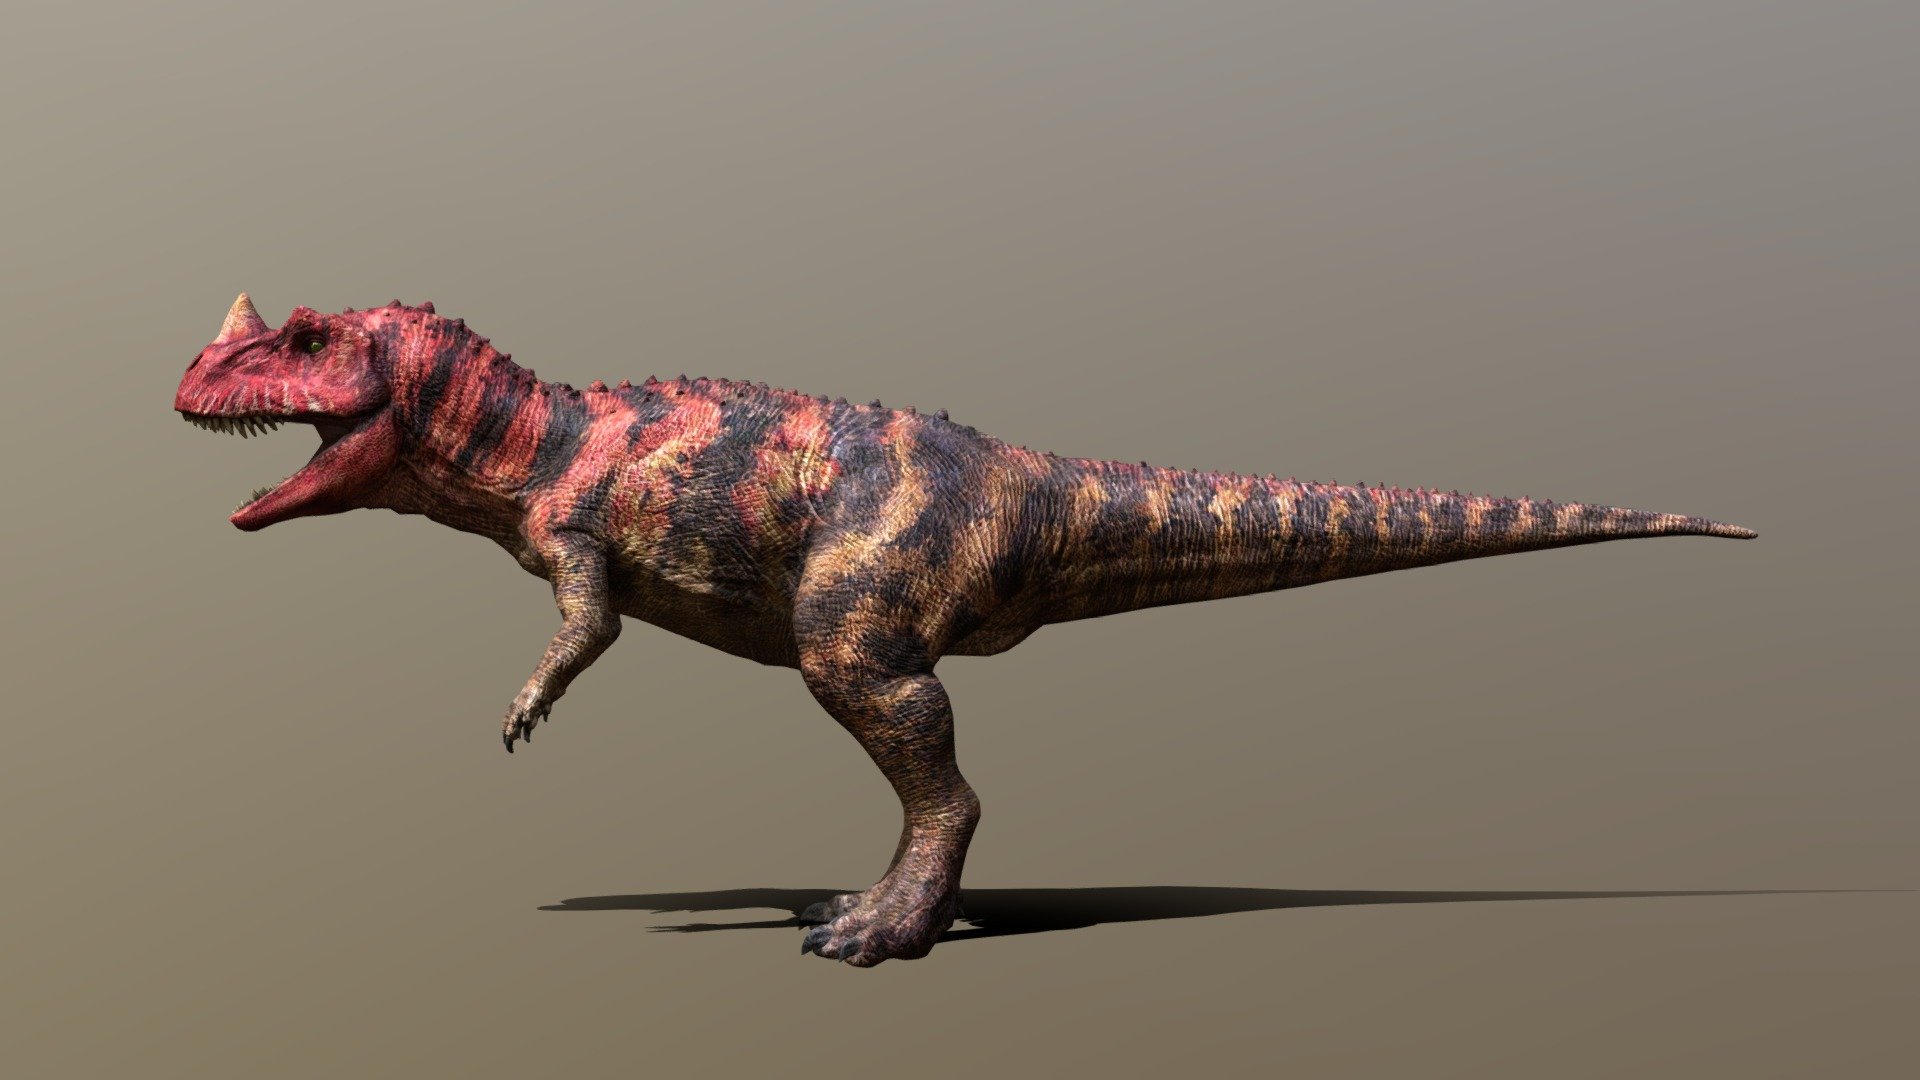 I made this Ceratosaurus model based on its reconstruction seen in the Jurassic Park 3 movie.

This model uses the Ceratosaurus model from Jurassic World Evolution 2 as a base, the base texture was made by my friend Patrik Causan, I applied some modifications to the texture so that it looks more faithful to the original CGI model from the movie.

It is regulated and has its textures in 4K quality.

Here is a link to the SFM version https://steamcommunity.com/sharedfiles/filedetails/?id=3006295482

Credits:
Frontier developments
Draco (me)
Patrik casuan for making the original texture - Jurassic park 3: Ceratosarusus - Download Free 3D model by Draco (@Draco120) 3d model